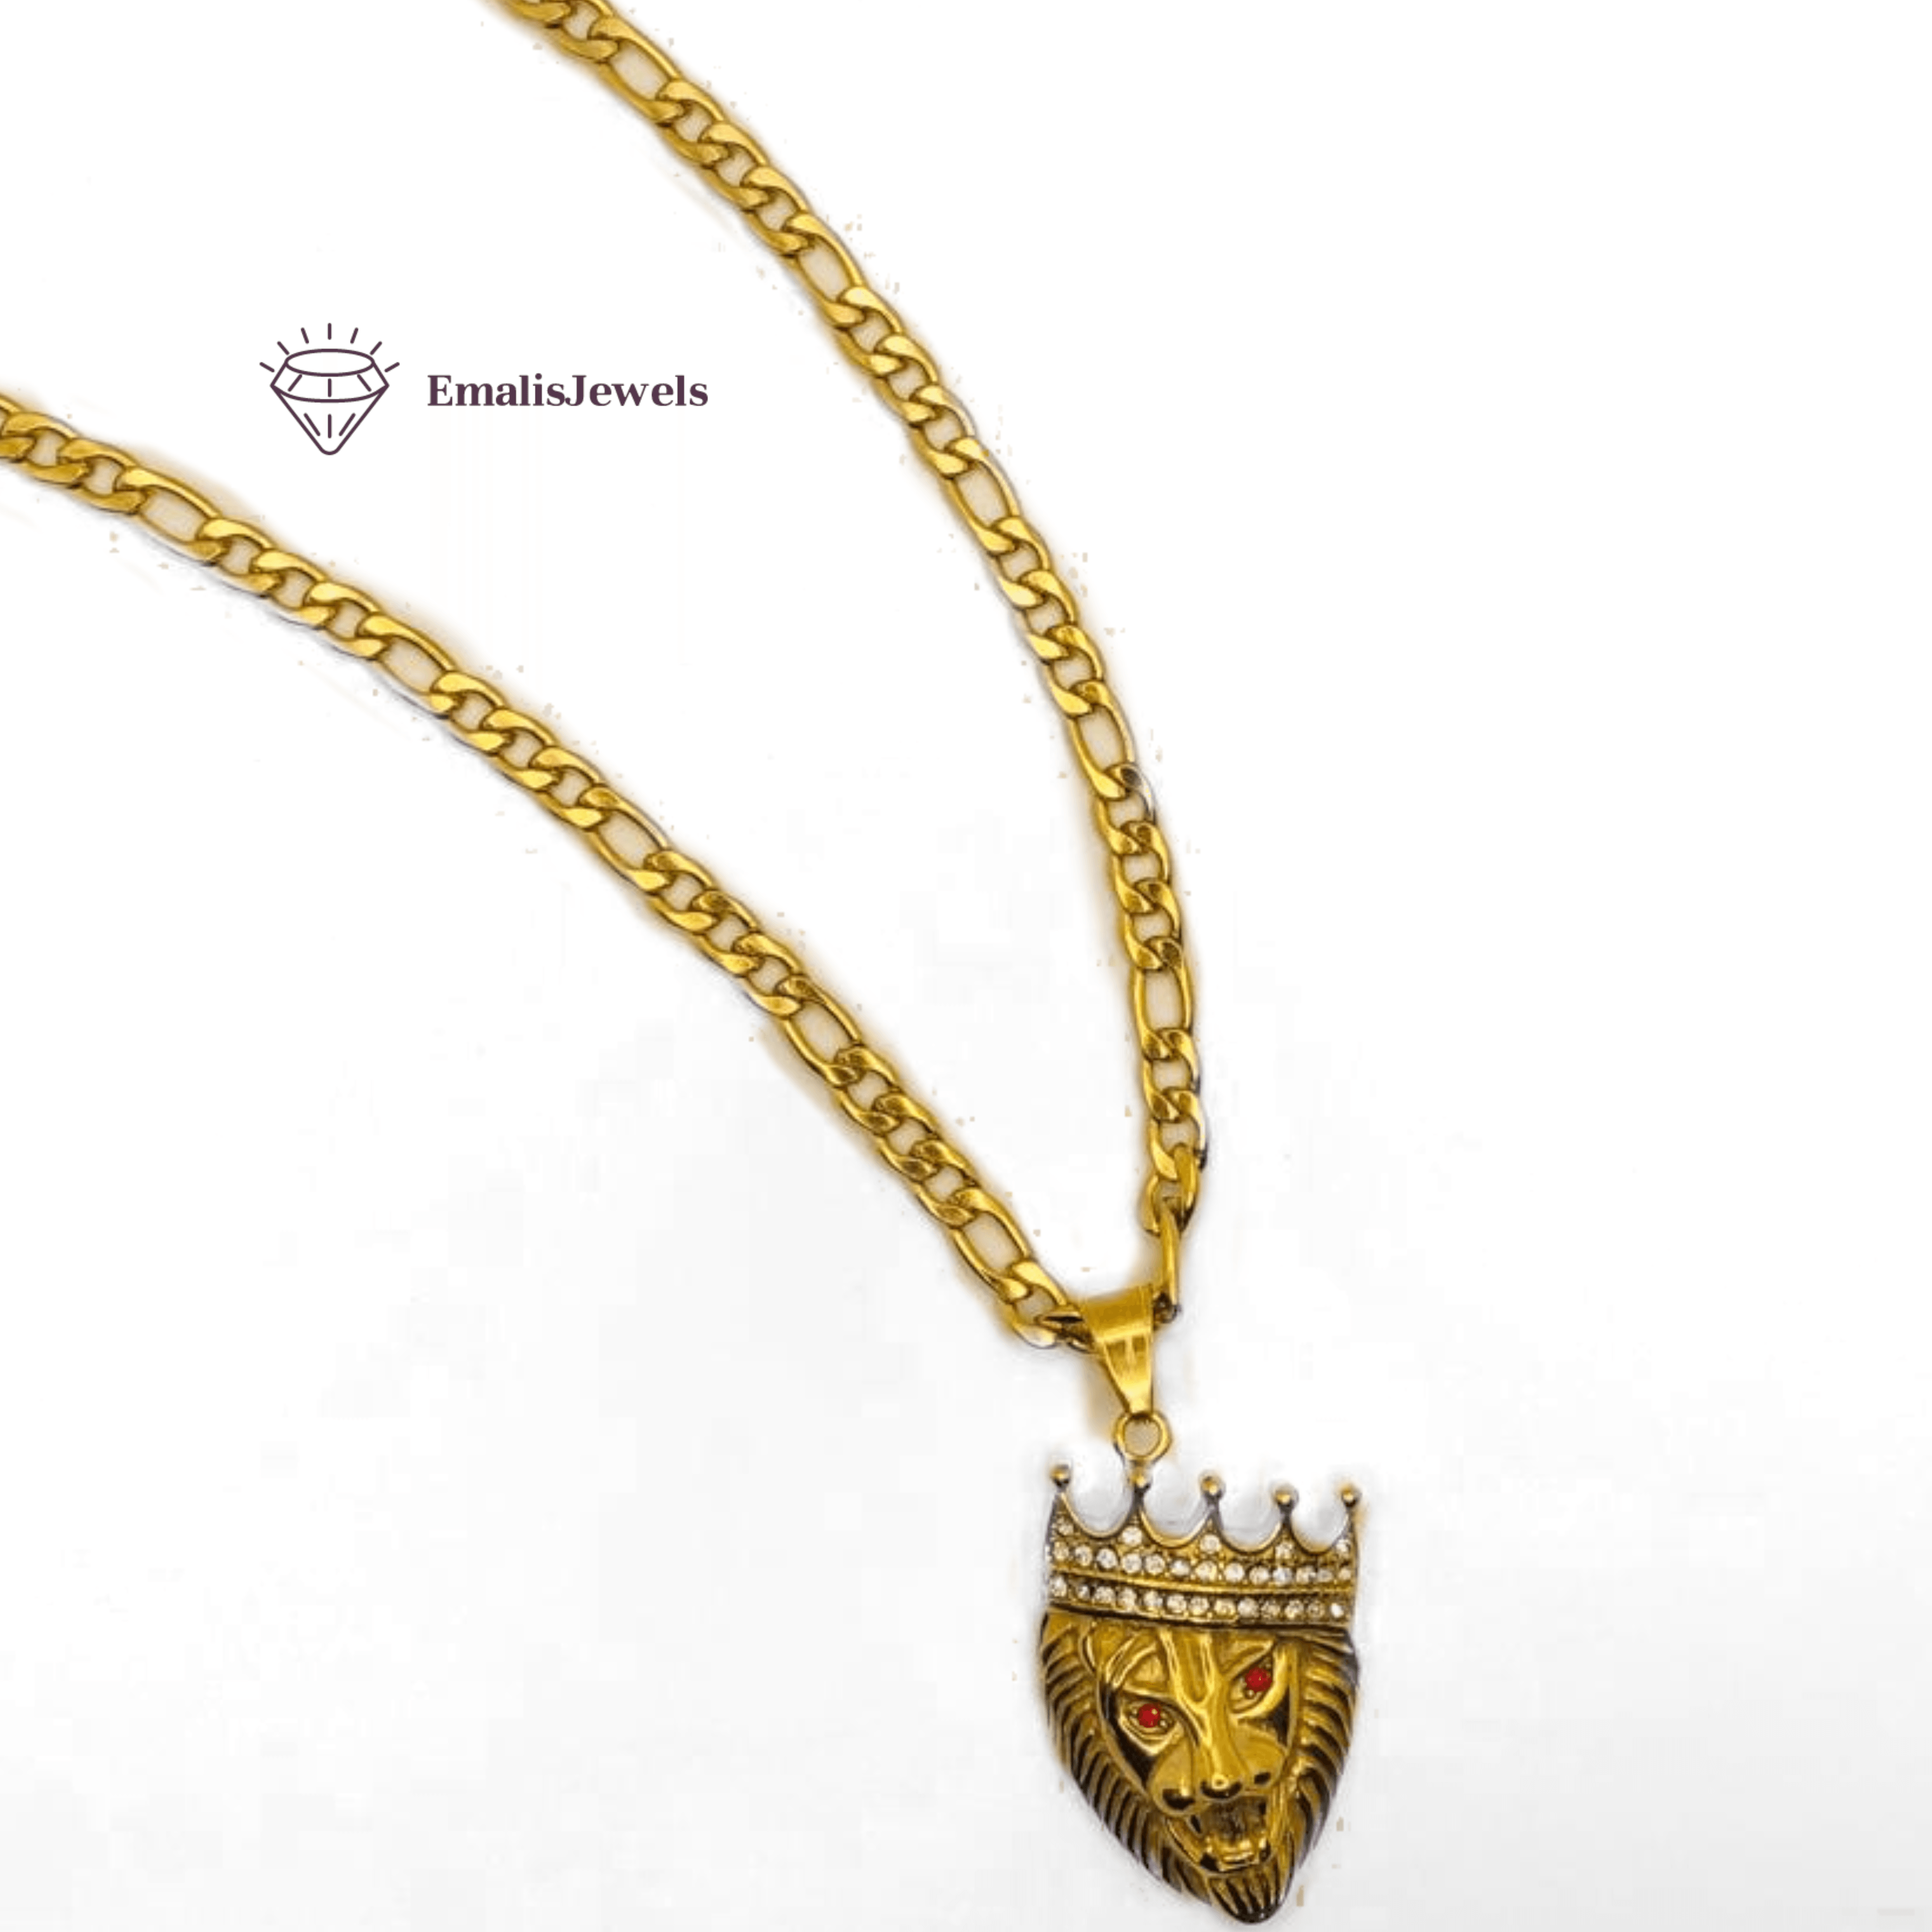 Stainless Steel Chain Necklace and Stainless Steel Gold Overlay King Lion Pendant